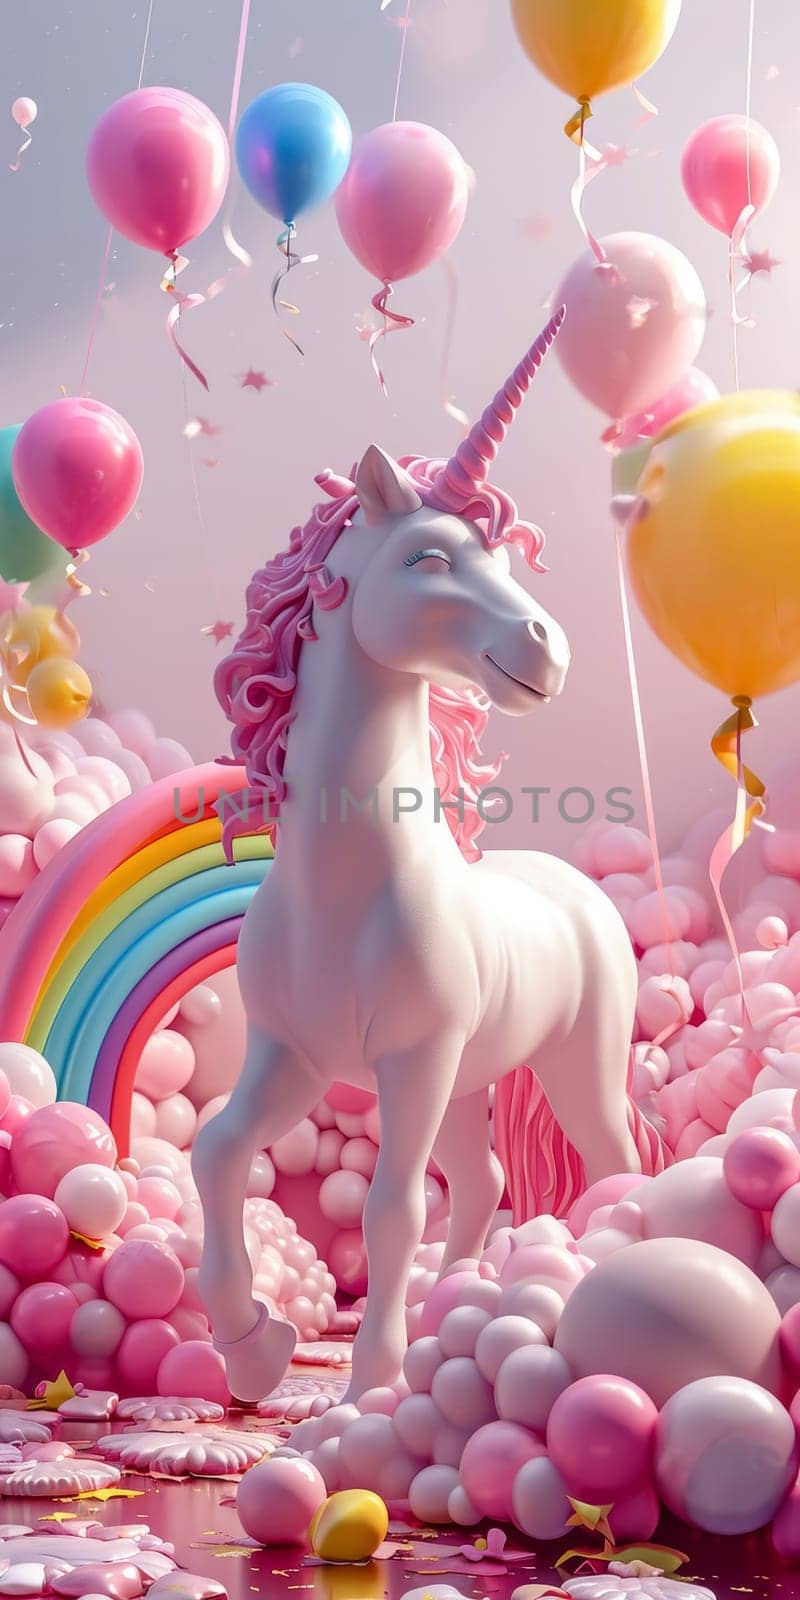 Unicorn figurine with birthday cake and balloons. 3D digital art with pastel colors. Birthday party concept for design and print. Studio celebration scene with place for text.